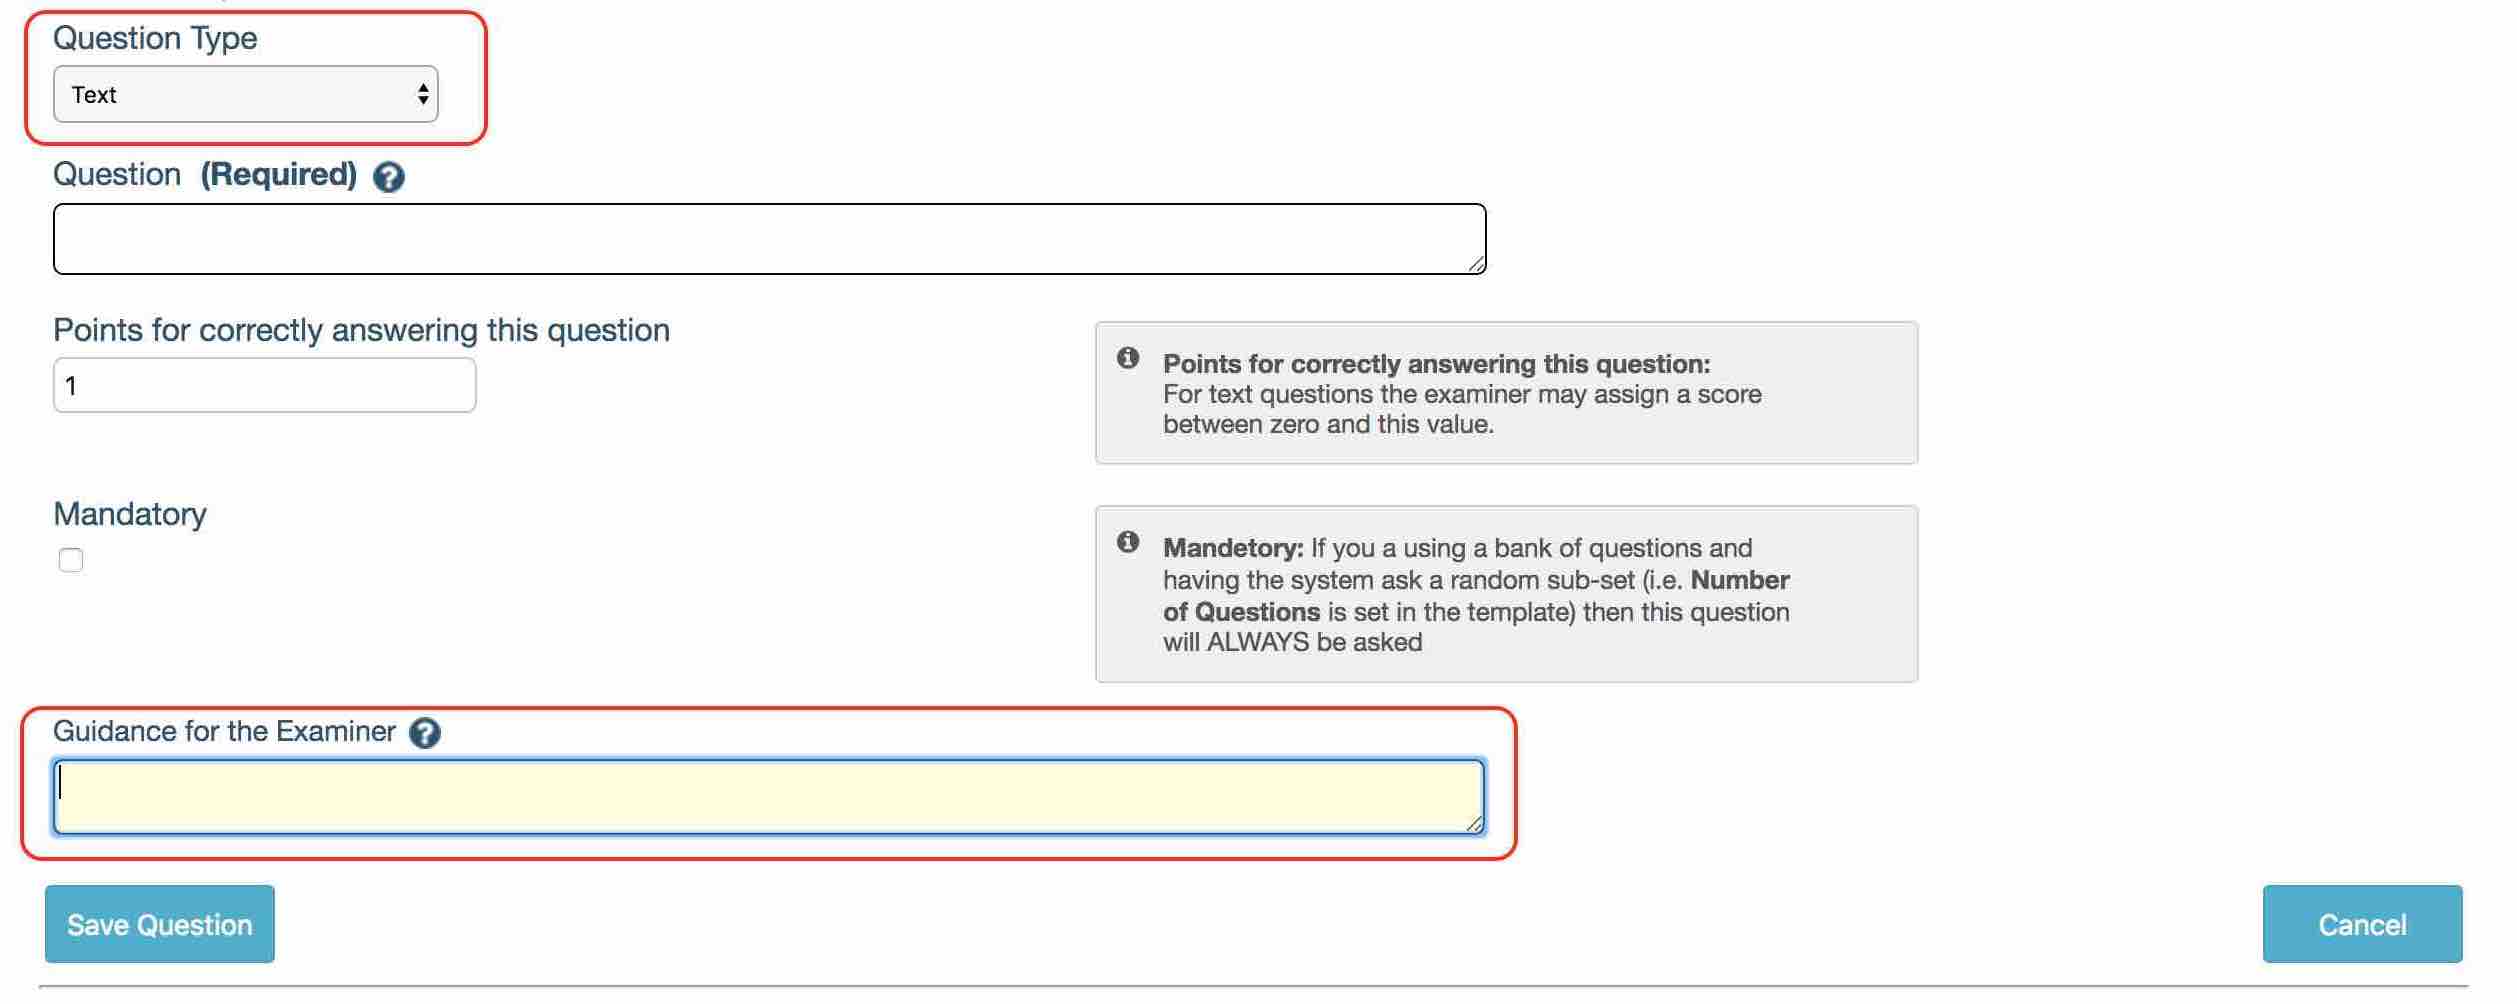 Question Type to Text and Guidance for the Examiner field appears